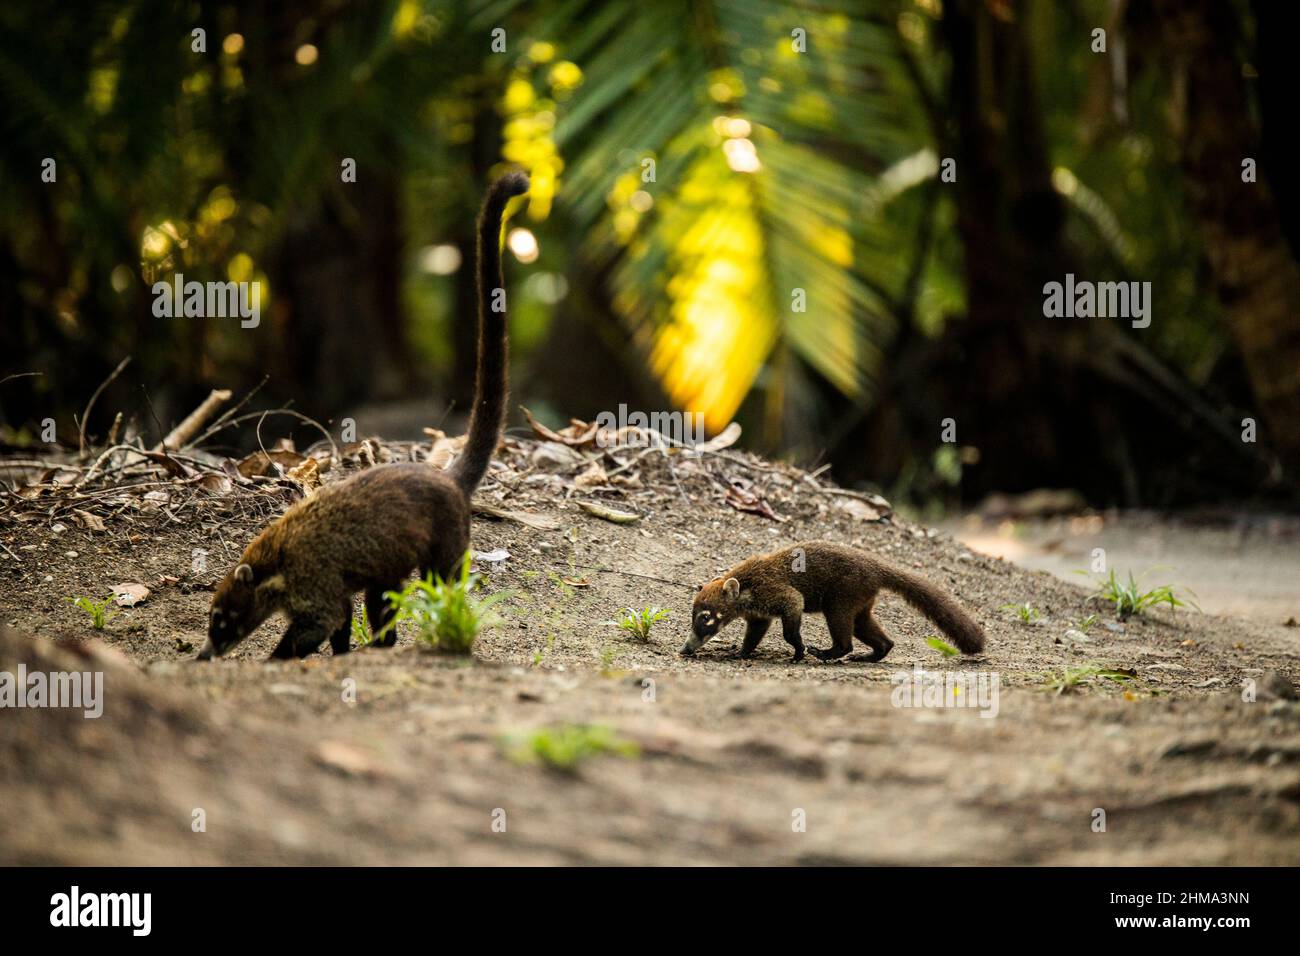 Adorable wild coatis with long tails walking on ground in woods with green exotic trees in nature of Costa Rica Stock Photo